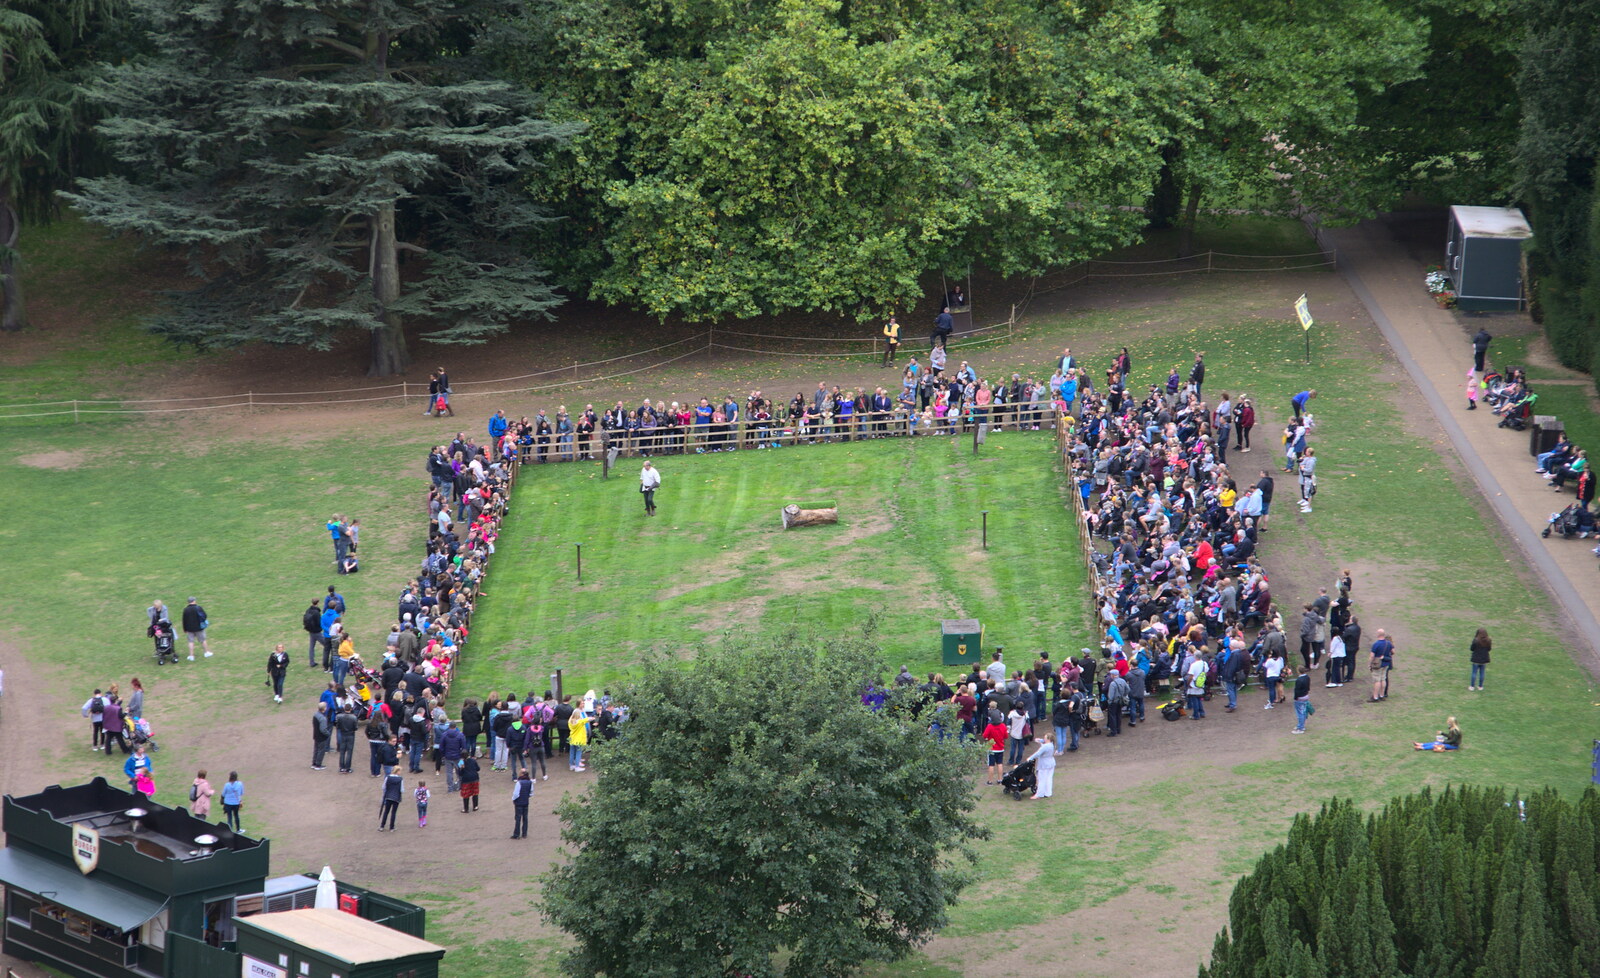 Aerial view of the next bird demonstration from A Day at Warwick Castle, Warwickshire - 8th September 2018